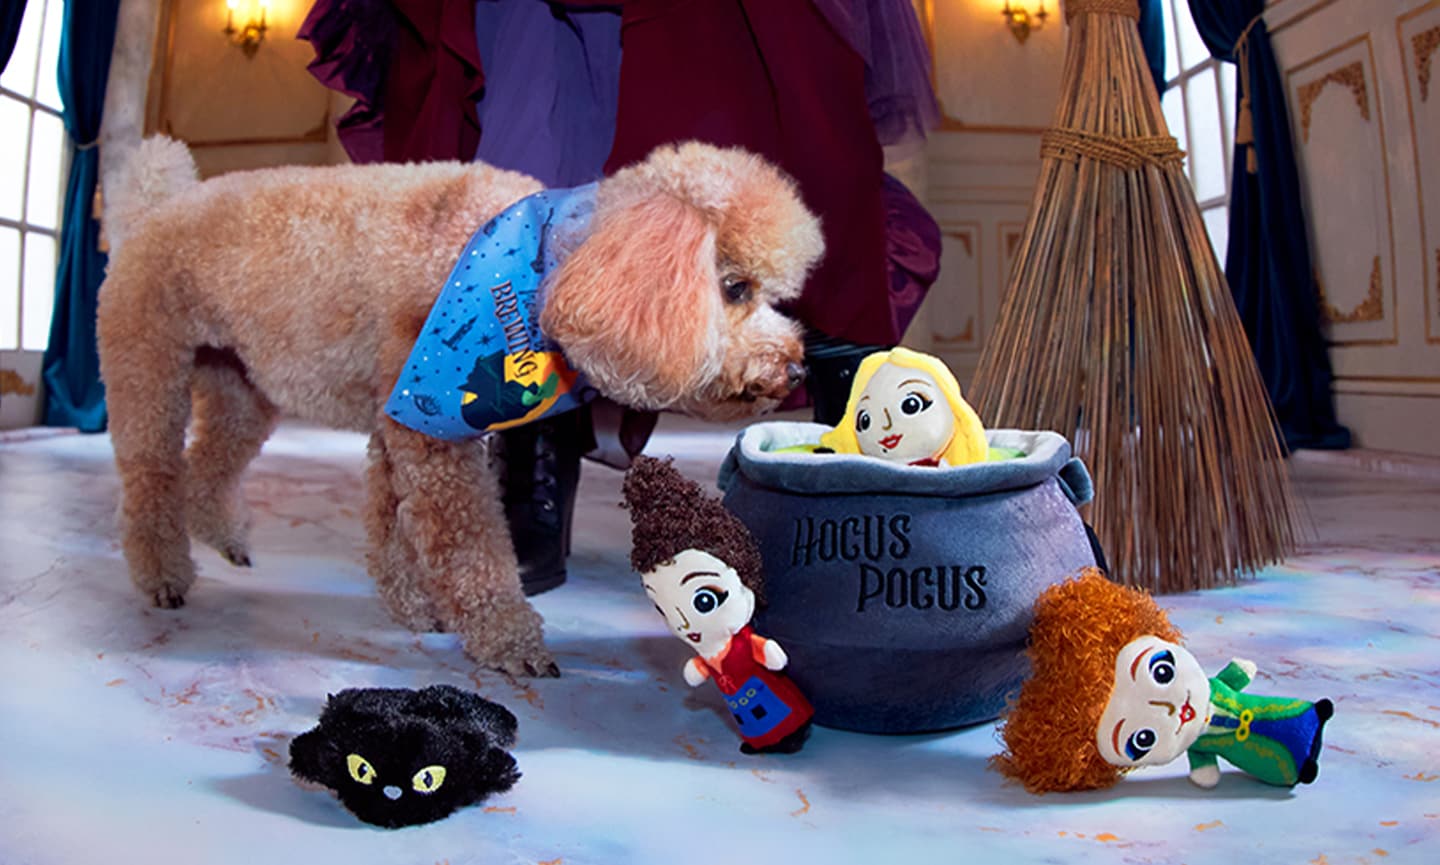 Your Pets Can Hilariously Enjoy 'Hocus Pocus' as Much as You Do •